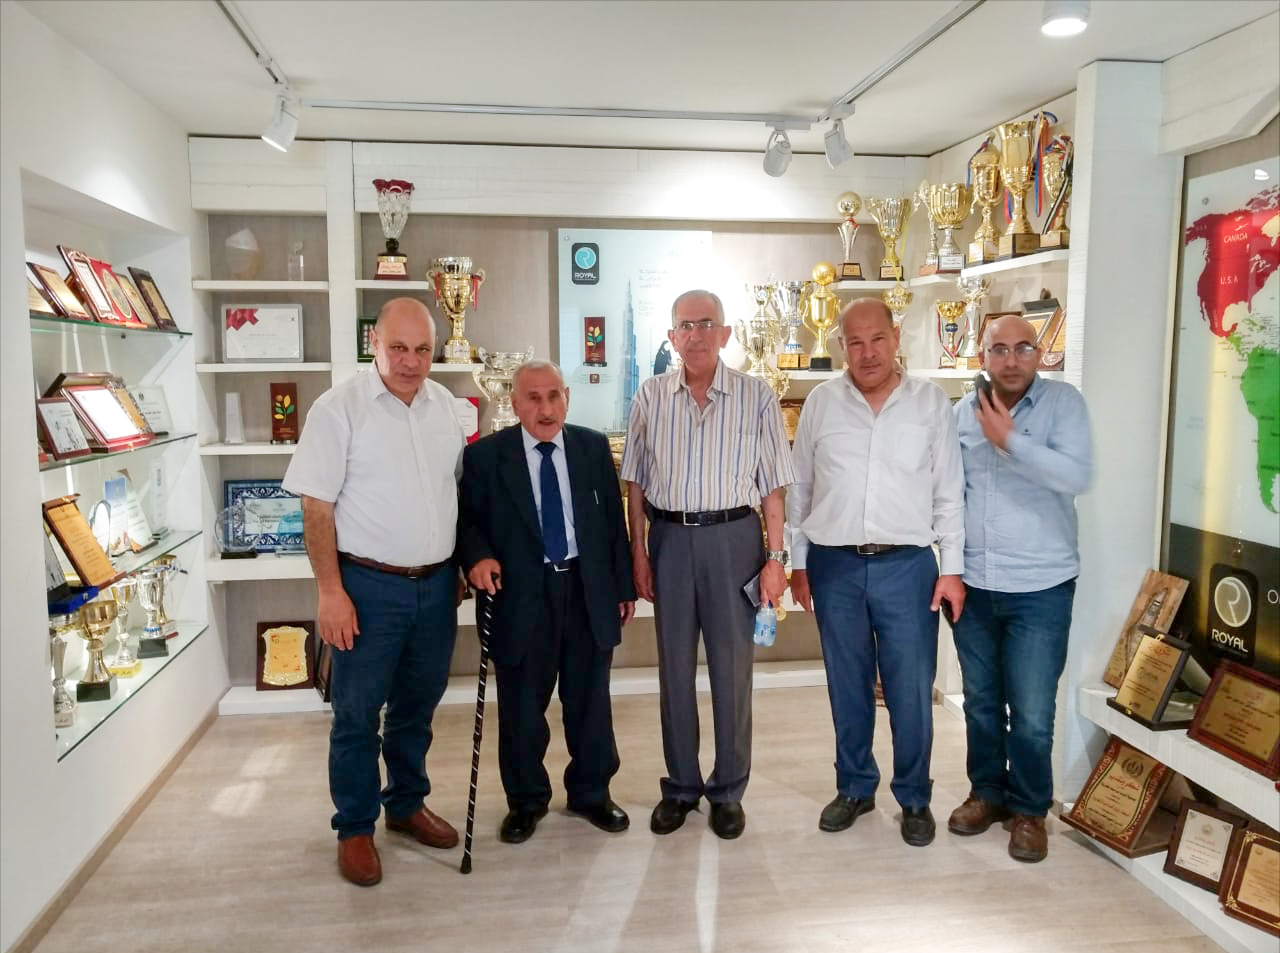 Royal receives a consultant from Hamouda Group of Companies from Jordan